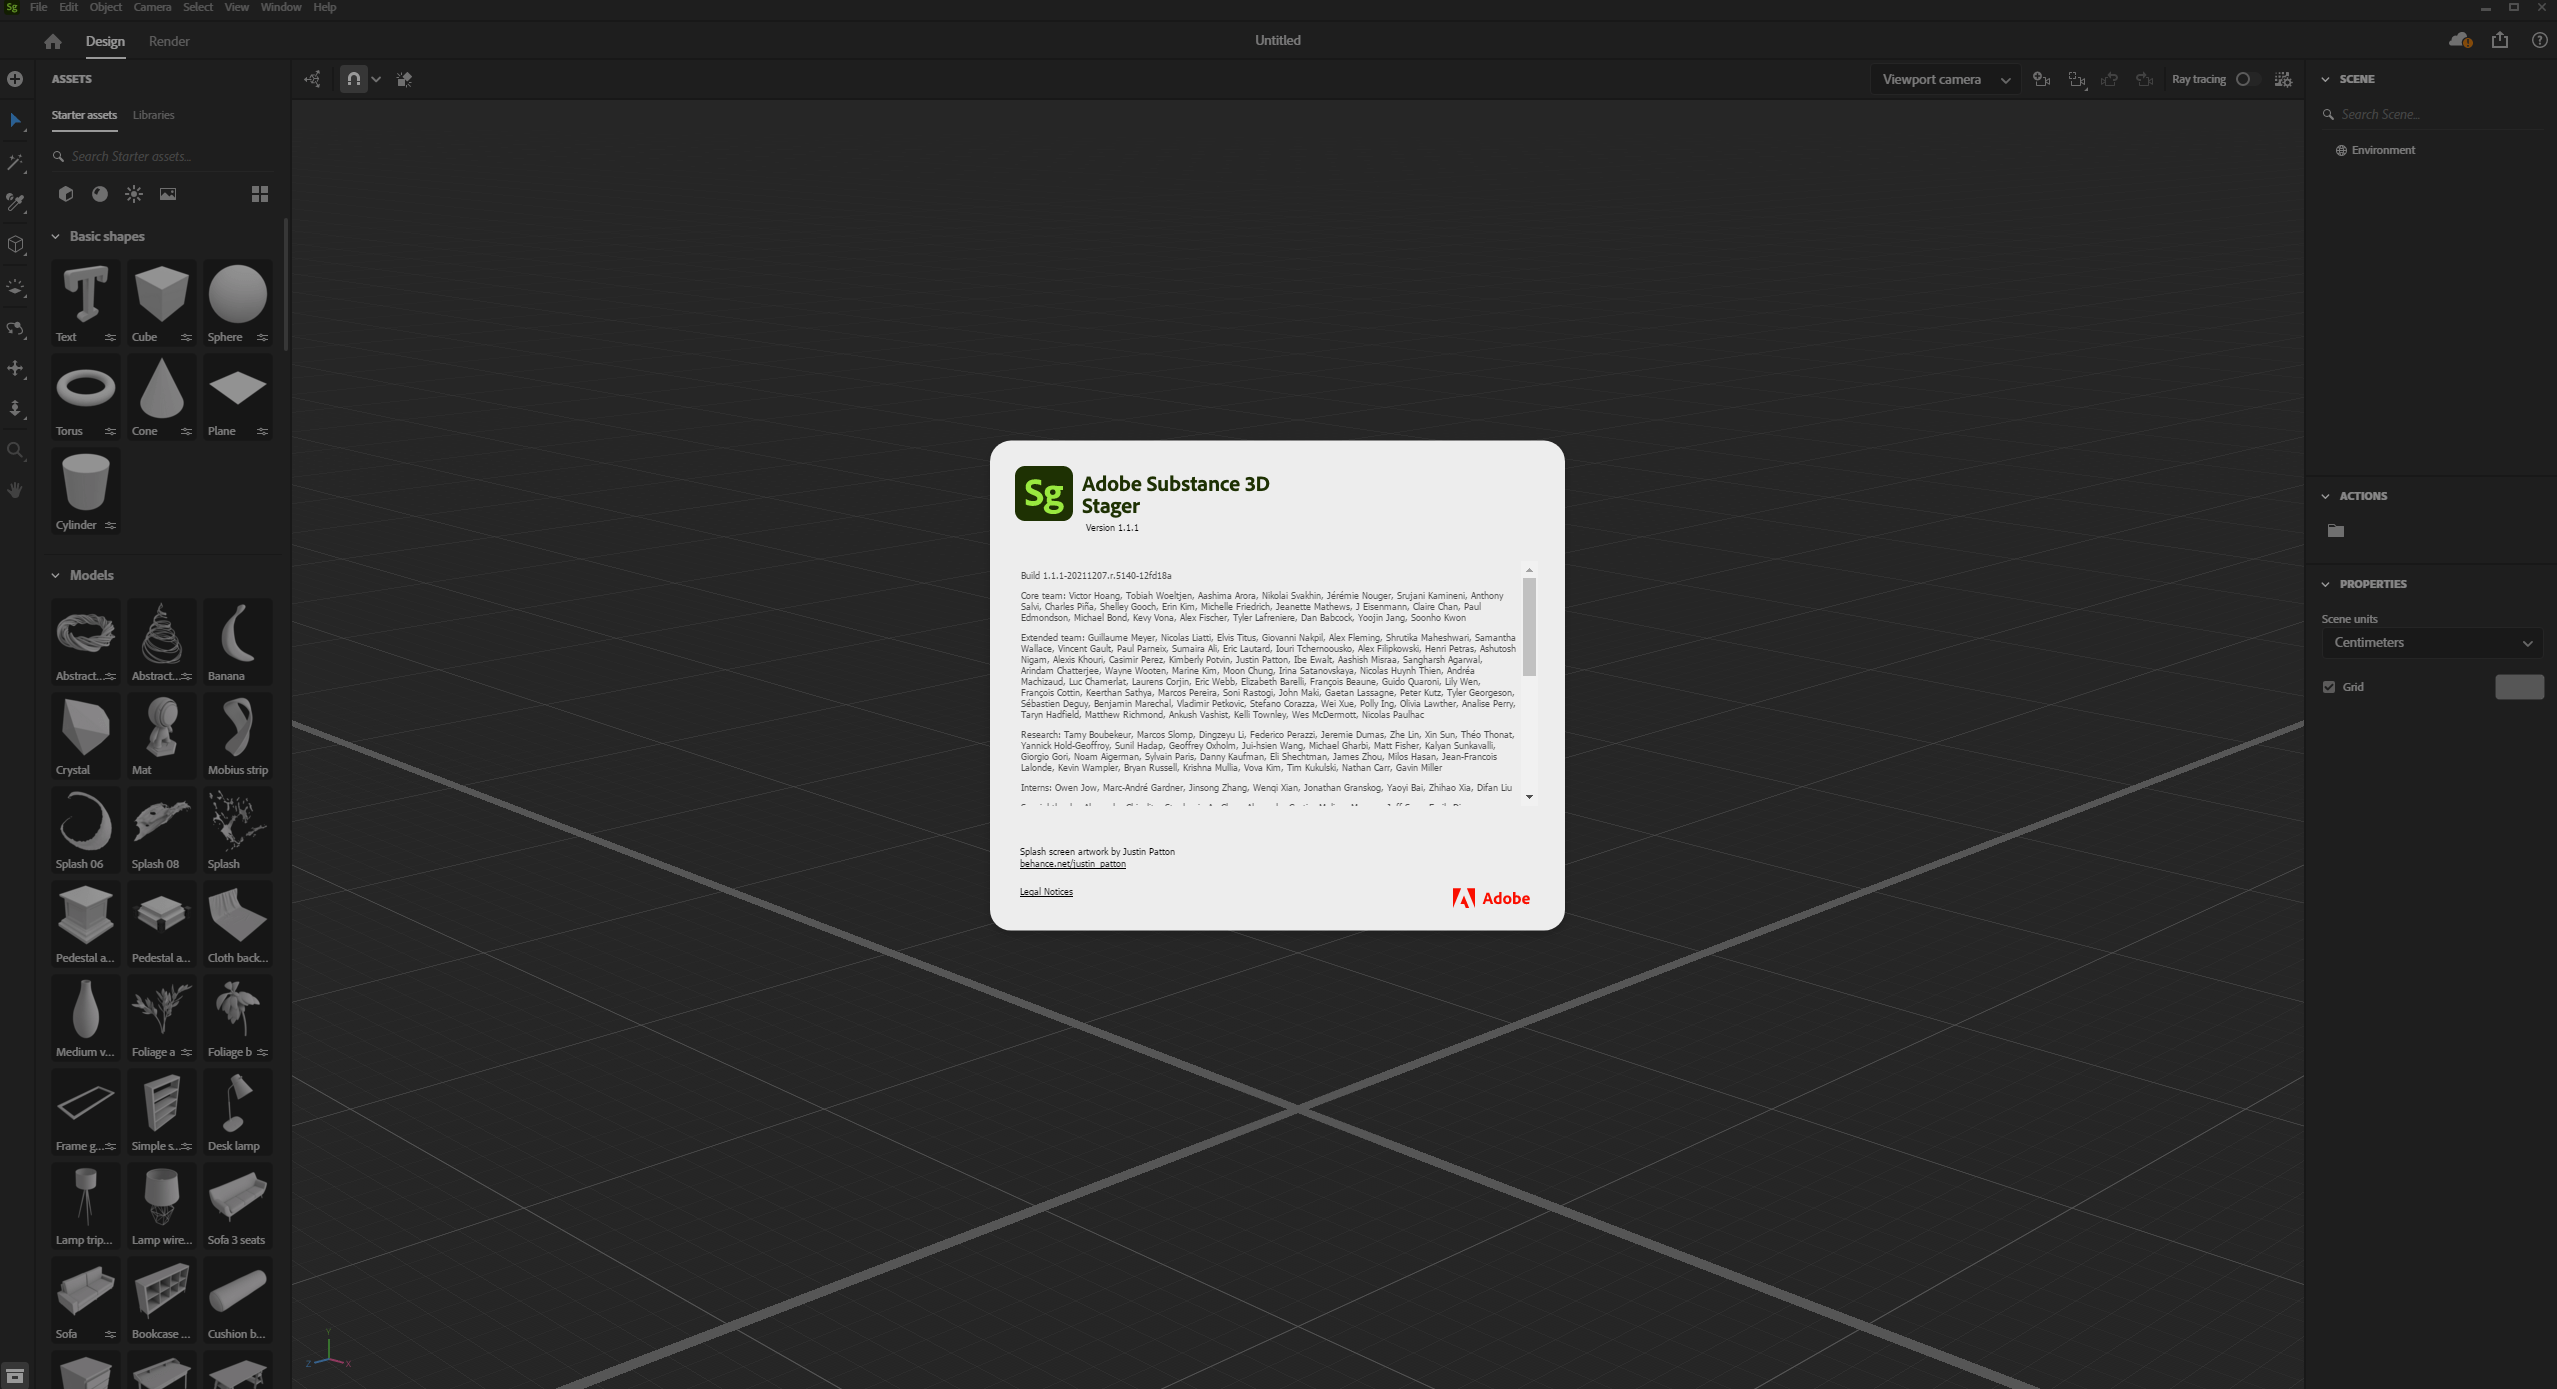 download the last version for windows Adobe Substance 3D Stager 2.1.2.5671